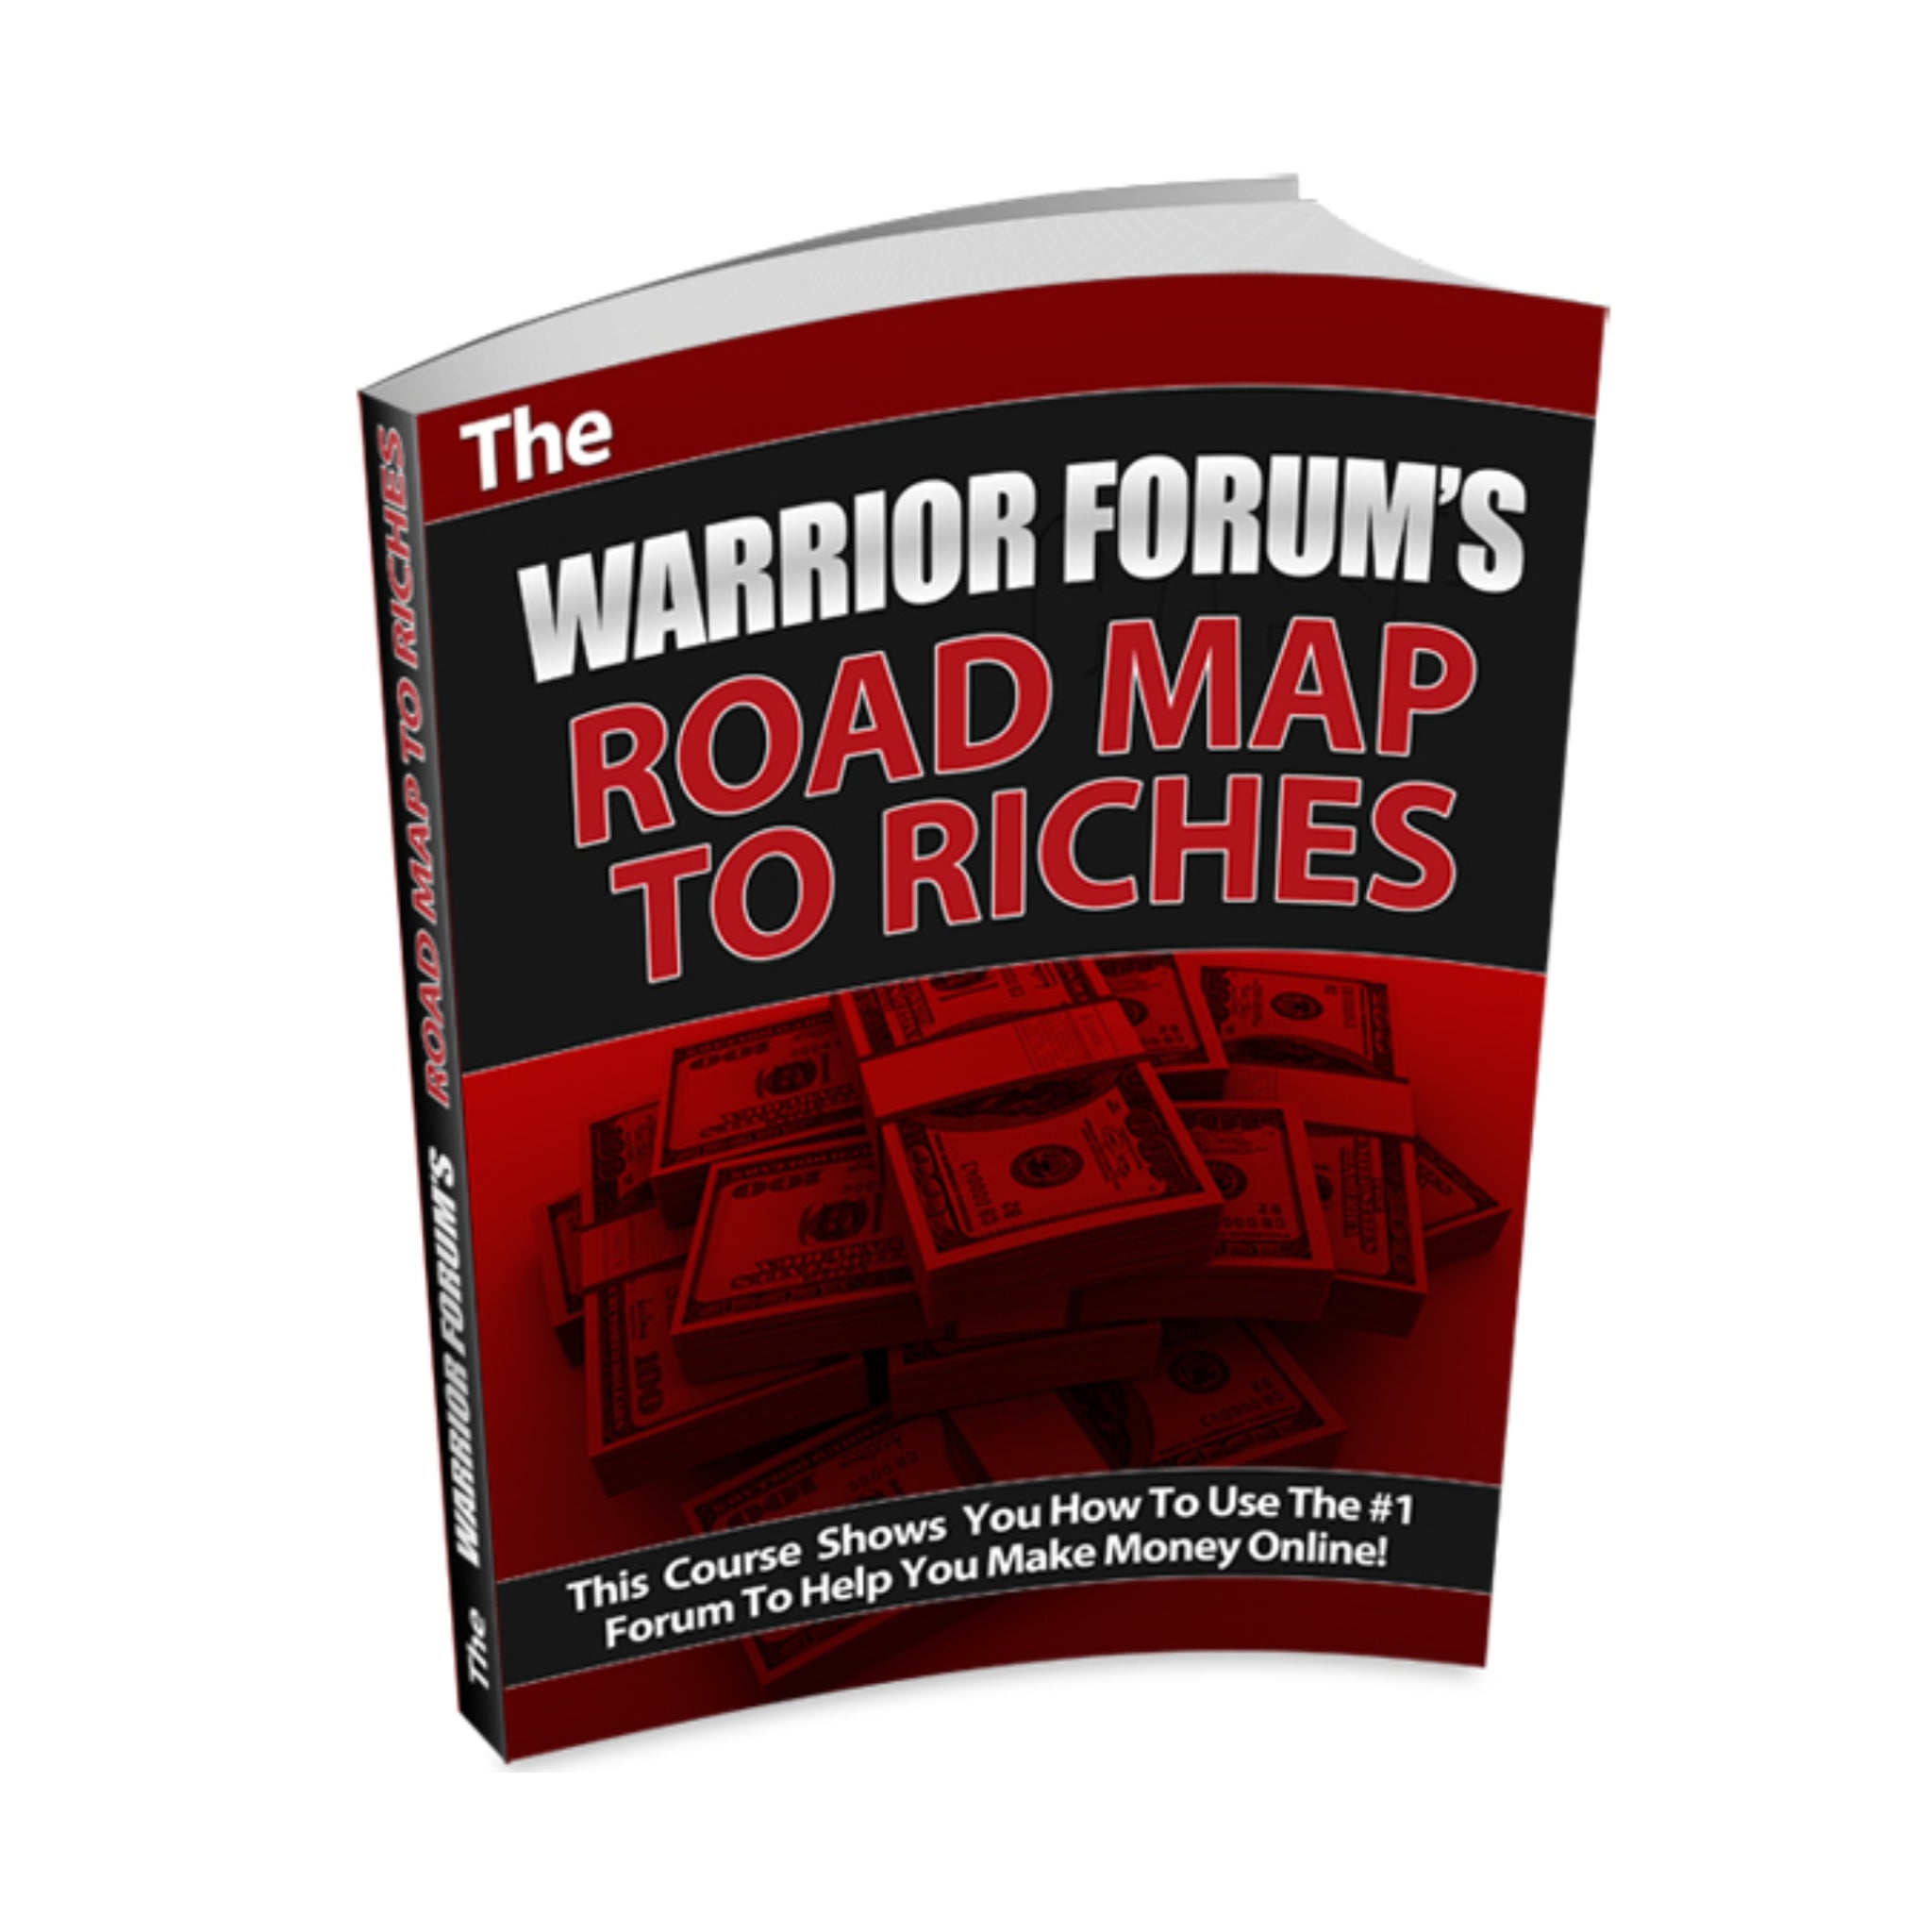 The Warrior Forum Road Map To Riches Ebook